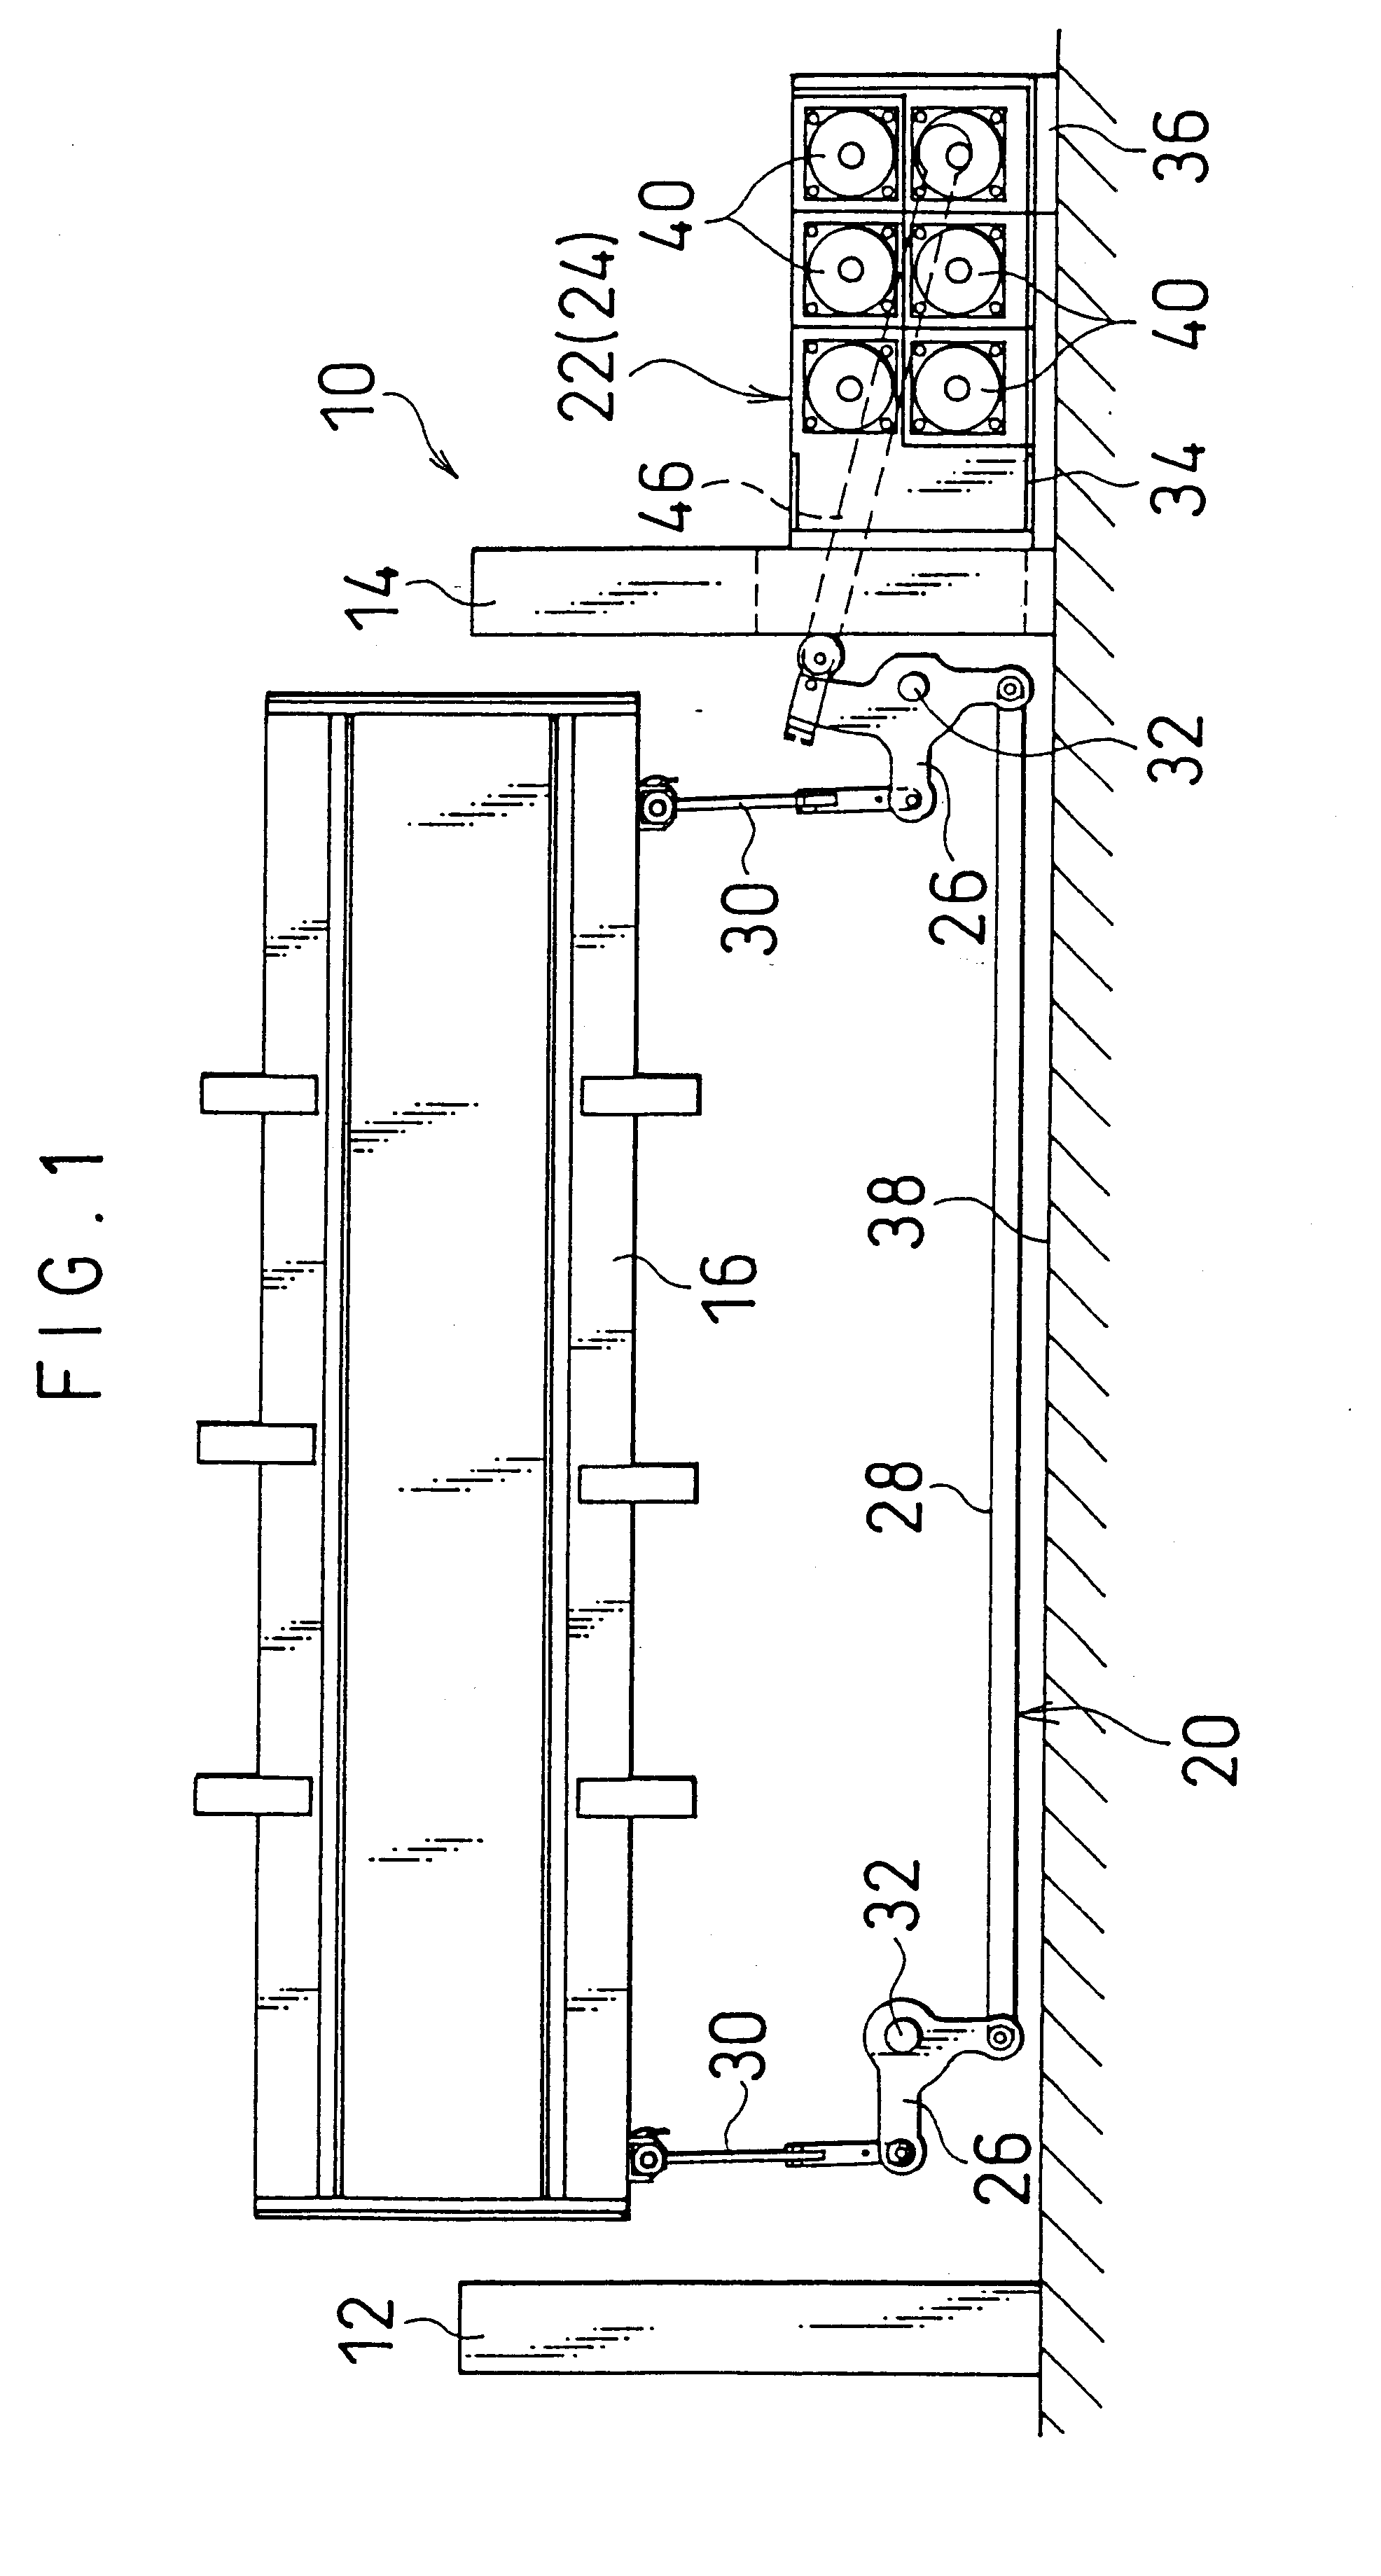 Electric shedding device in weaving machine